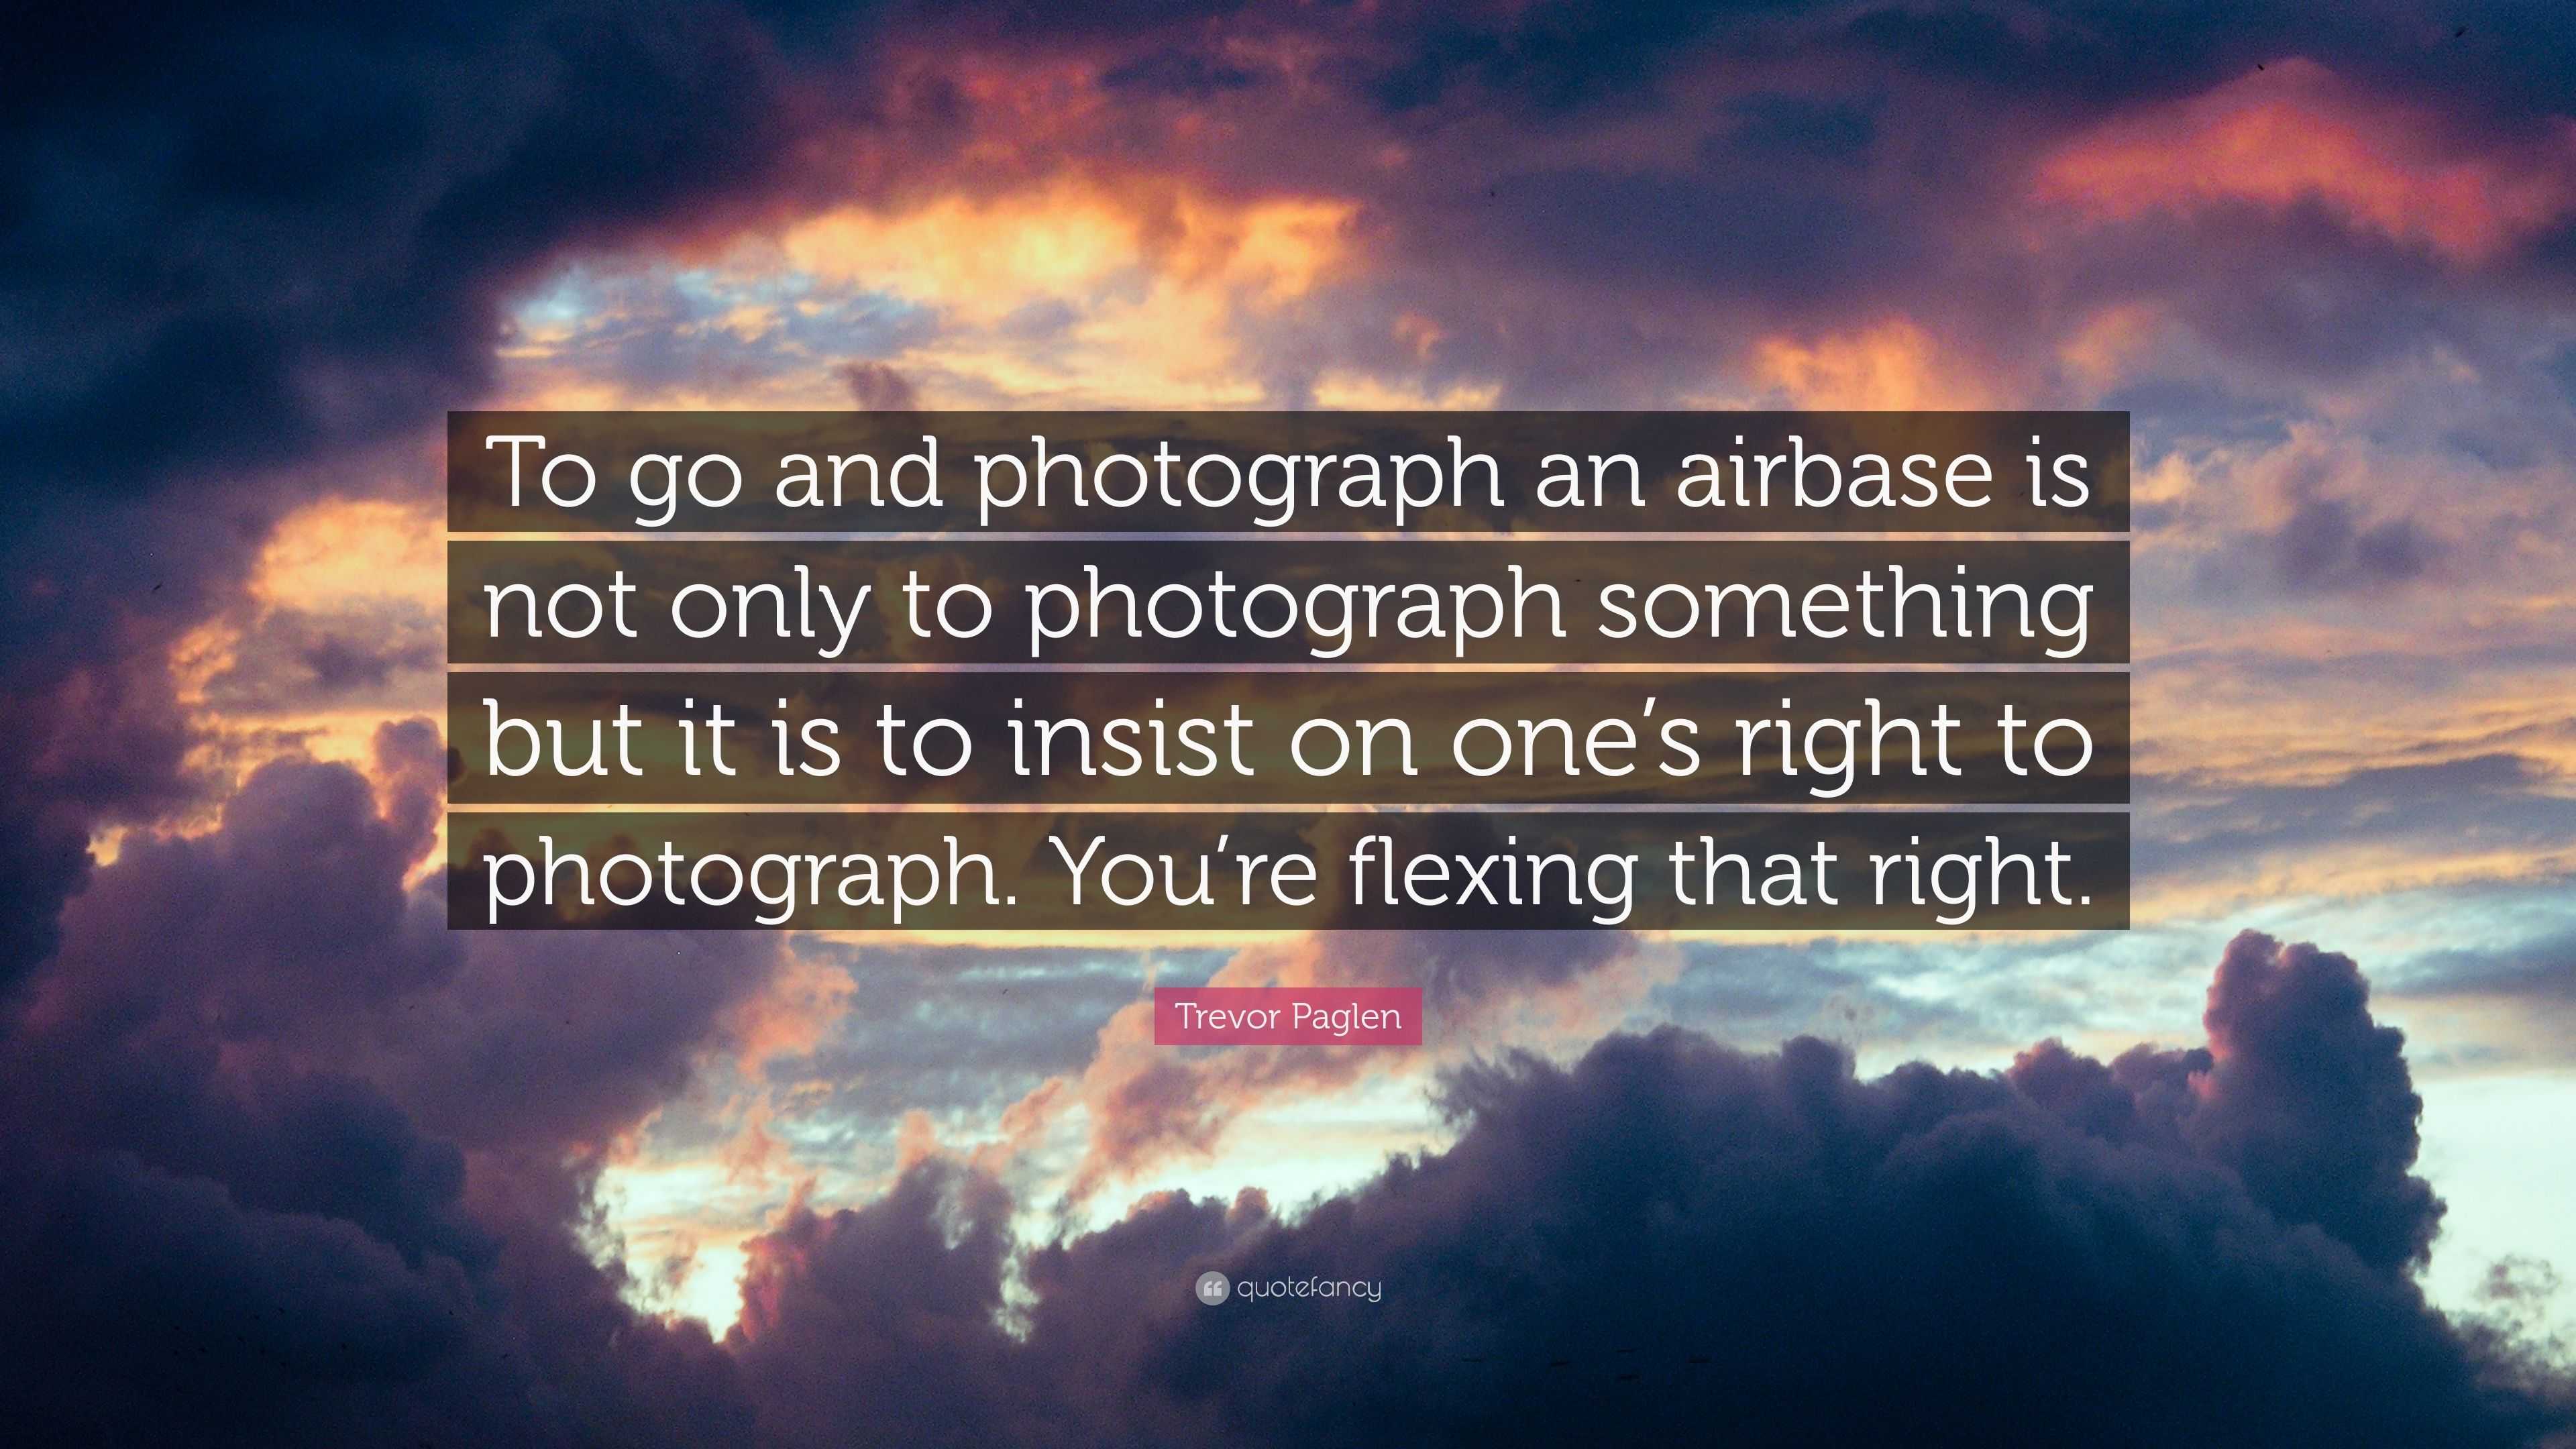 Trevor Paglen Quote: “To go and photograph an airbase is not only to ...